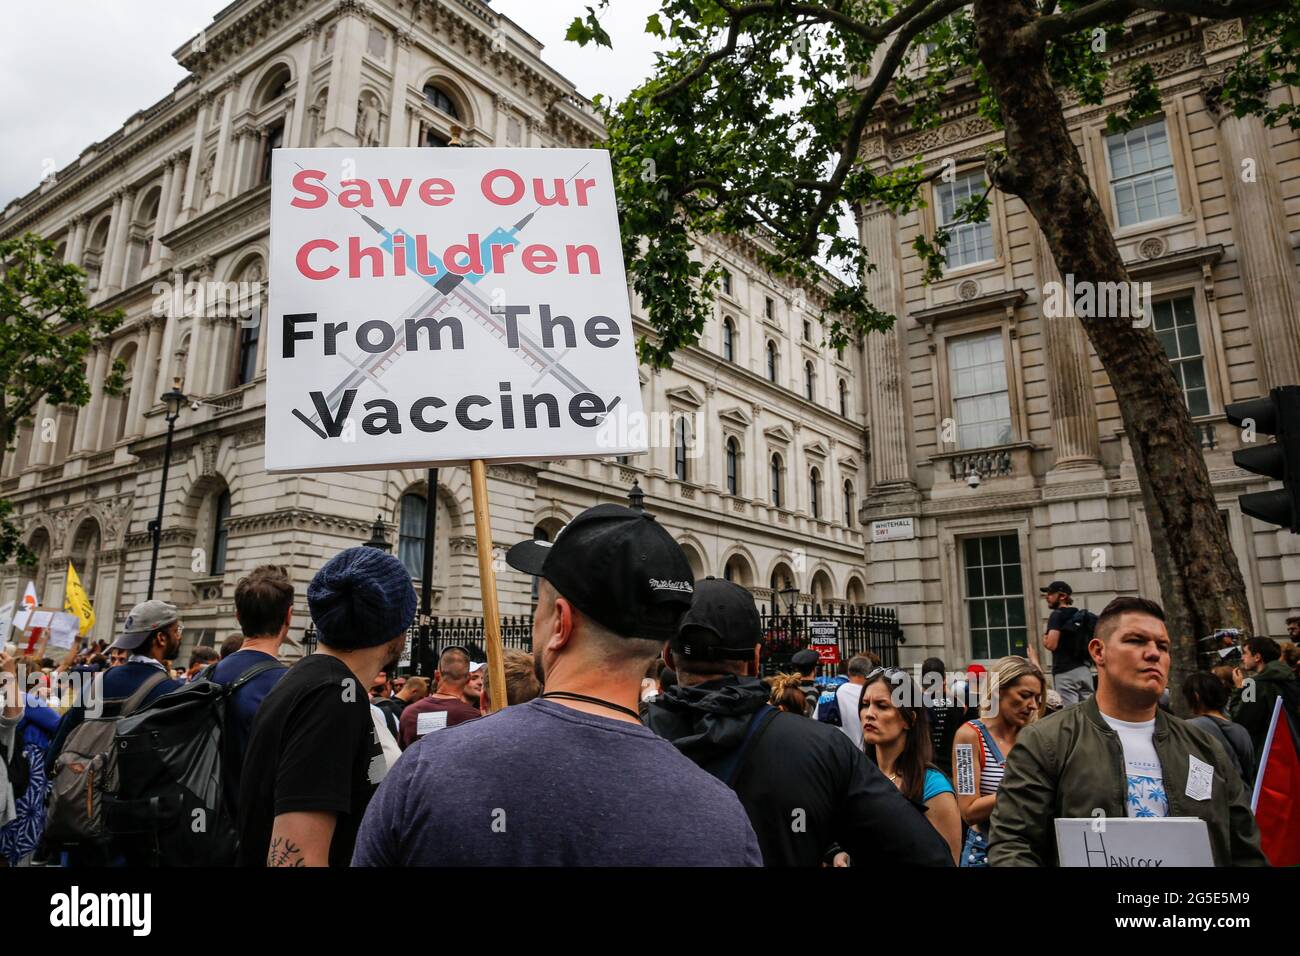 London, UK on June 26, 2021: Protesters holding placards demonstrate in front of Downing Street during Anti-Lockdown demonstration Unite for Freedom. People protesting against the lockdowns came together to raise their concerns regarding government vaccination legislations and freedom to travel and socialize. Stock Photo